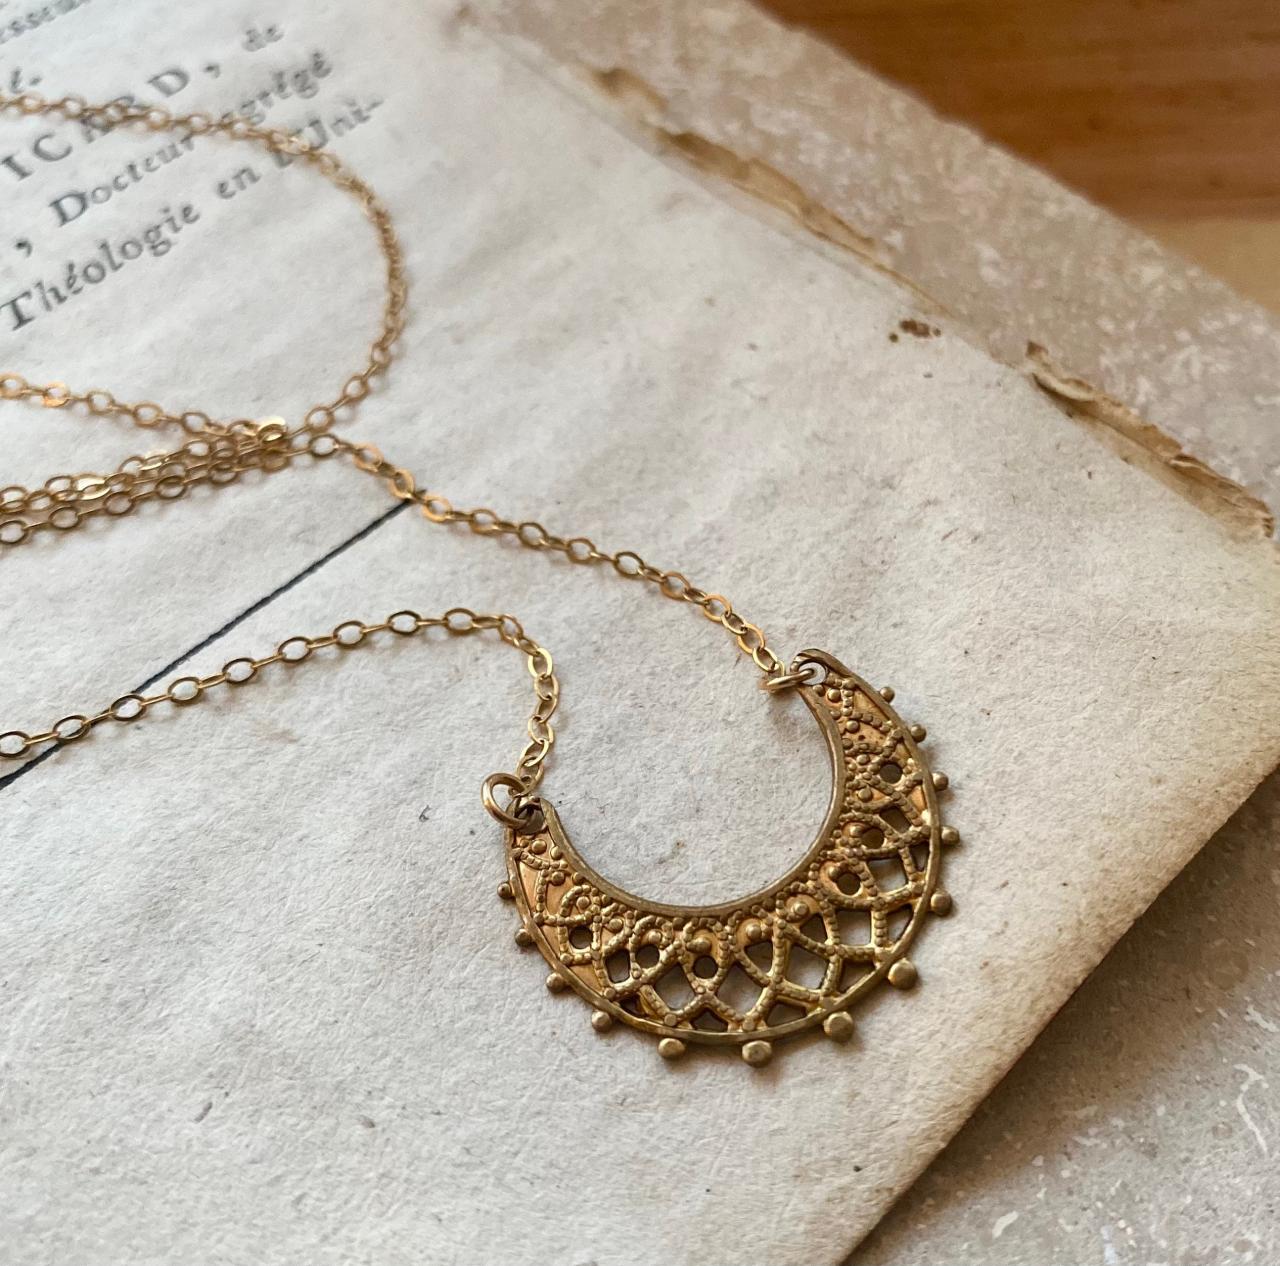 Brass Filigree Crescent Necklace Brass Jewelry Golden Simple Vintage Style Mothers Day Gifts Under 30 Art Nouveau Gold Filled Chain Necklace